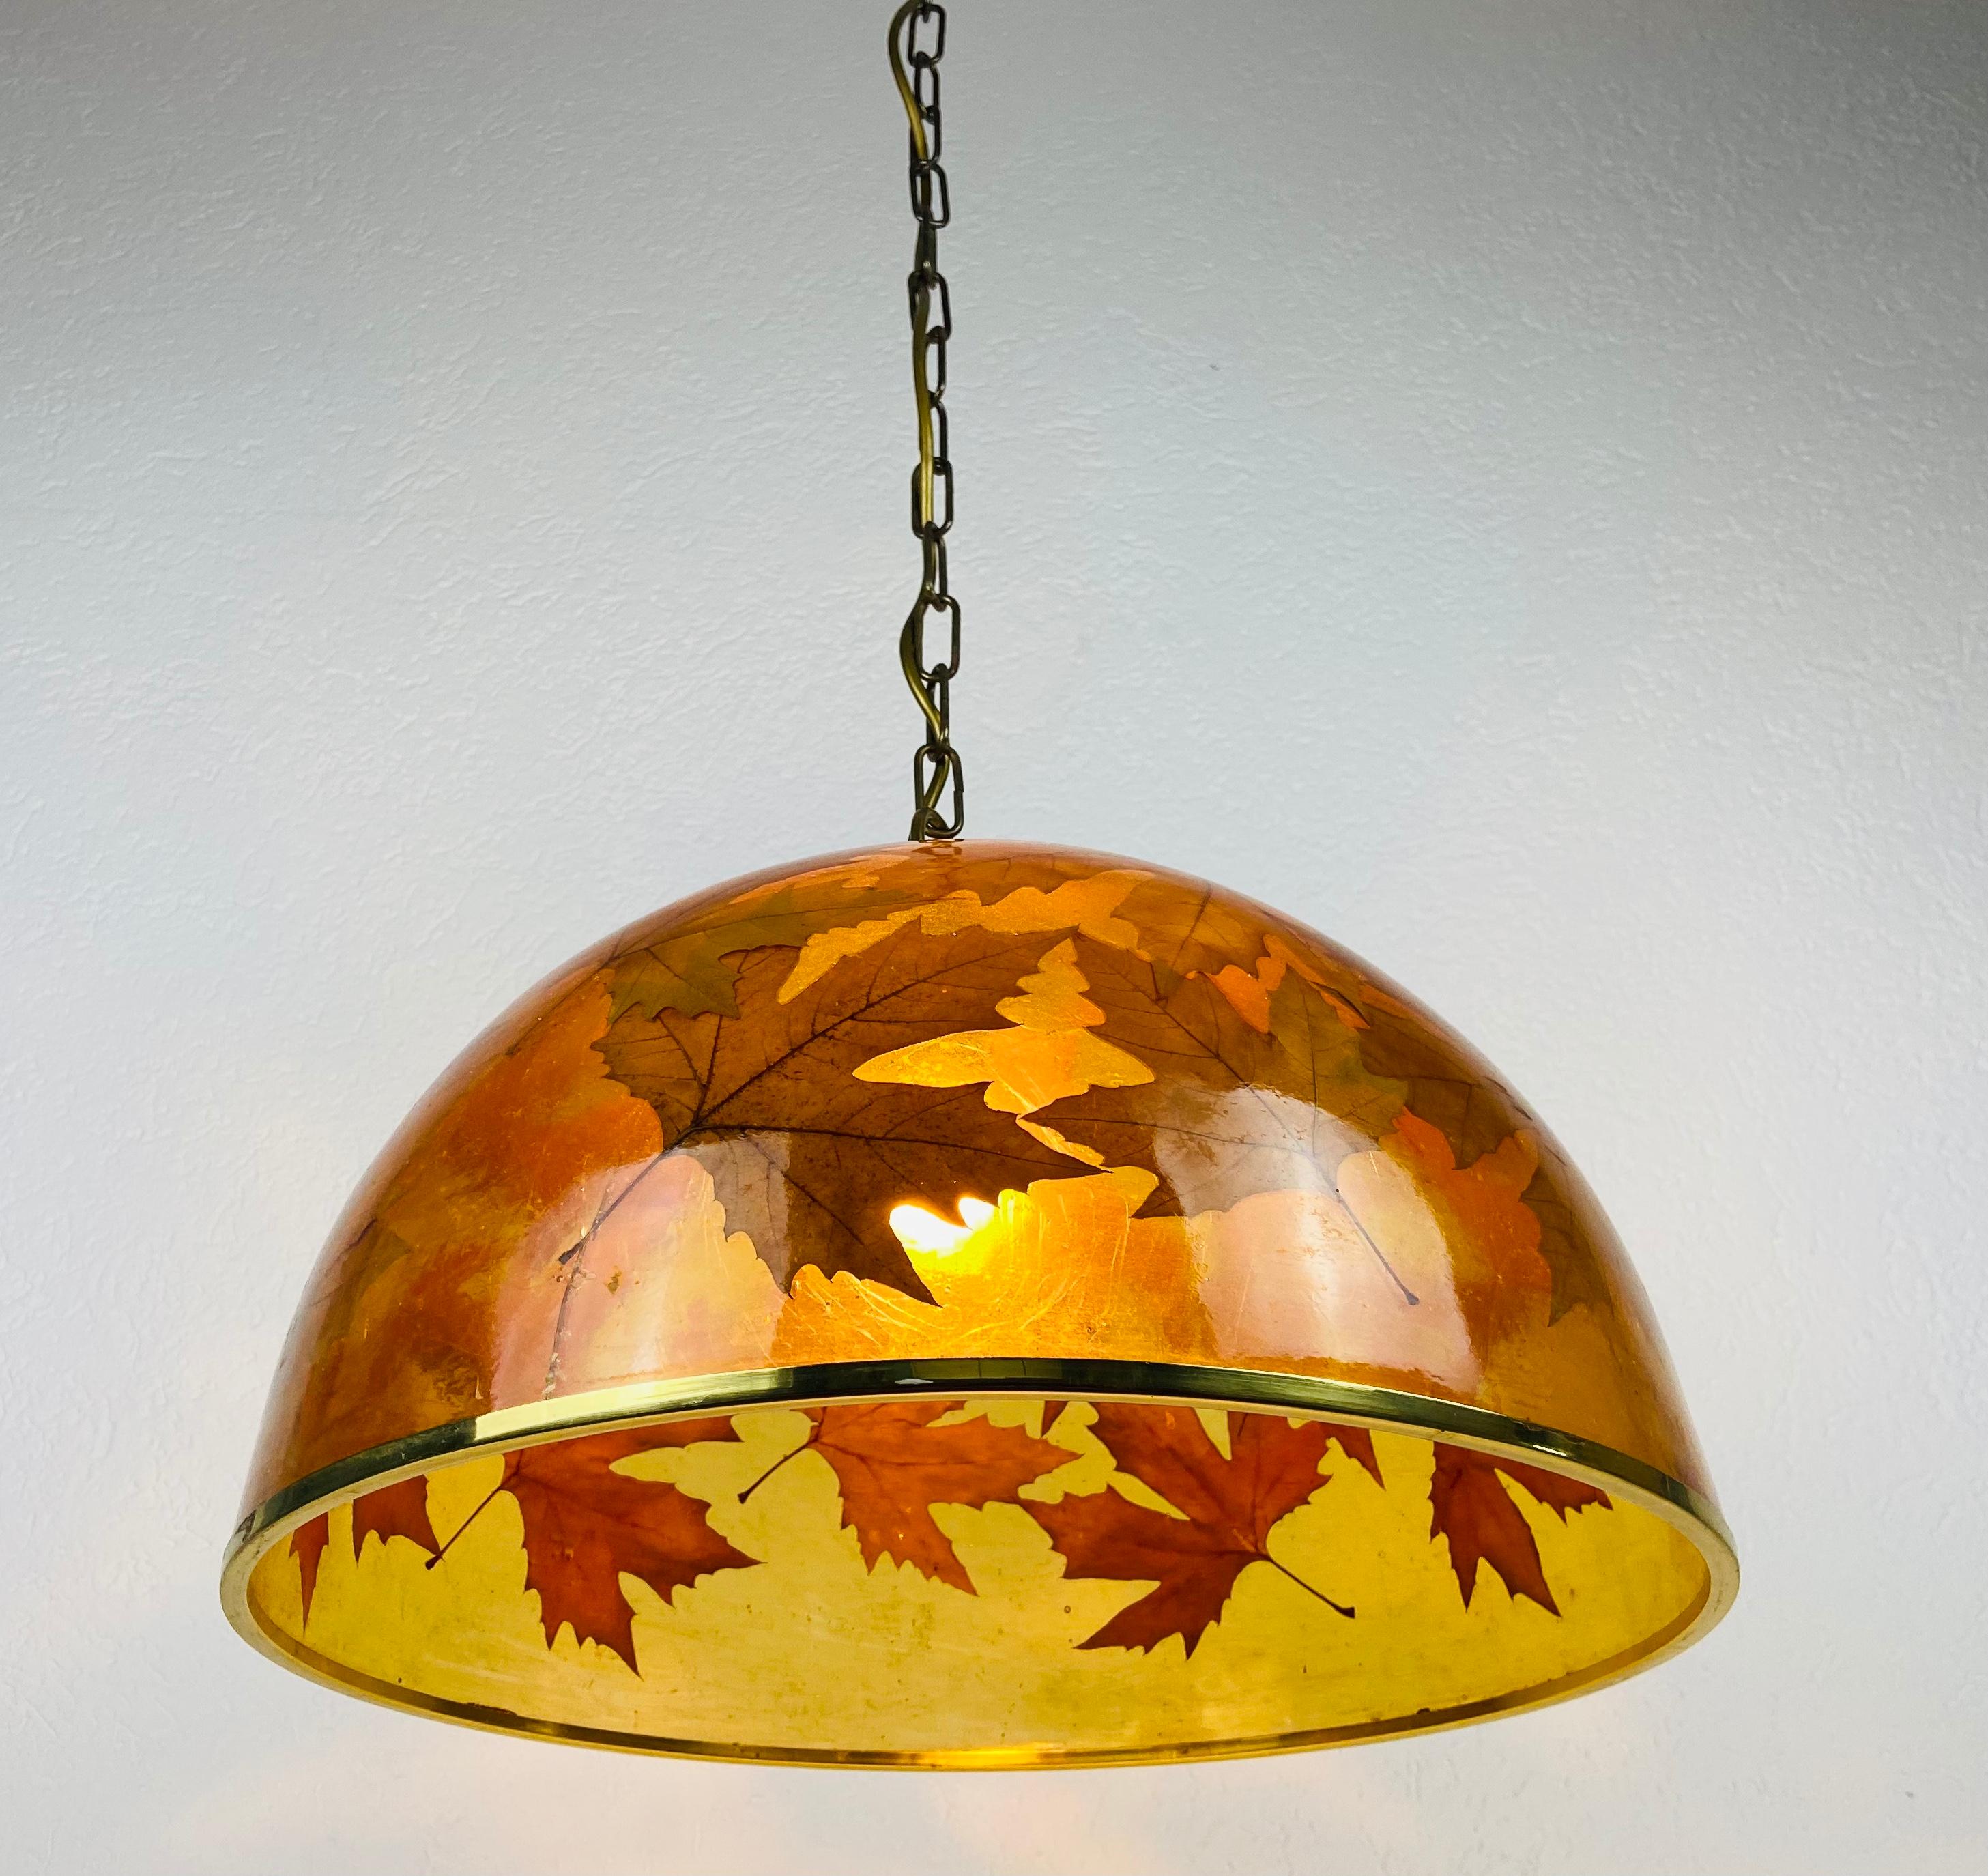 Midcentury Plexiglass Pendant Lamp with Real Leaves, Germany, 1960s For Sale 2